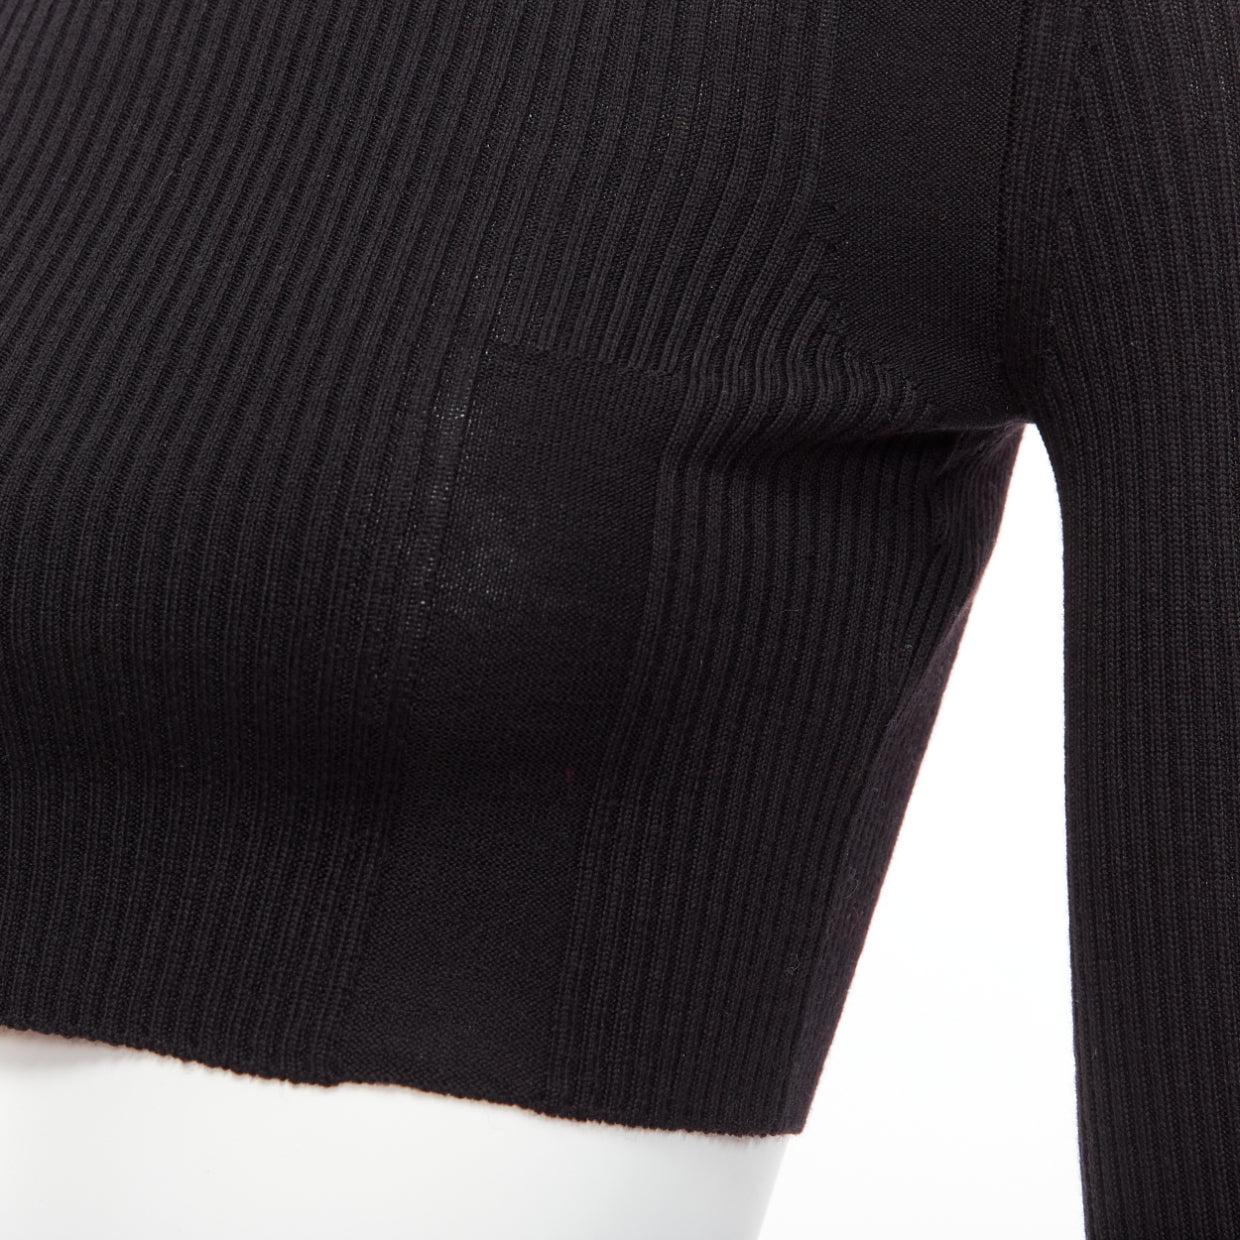 MAISON MARGIELA 2015 100% wool black crew ribbed sock knit crop top XS
Reference: AAWC/A00805
Brand: Maison Margiela
Collection: 2015
Material: Wool
Color: Black
Pattern: Solid
Closure: Slip On
Extra Details: Signature 4 stitches decoration at back.